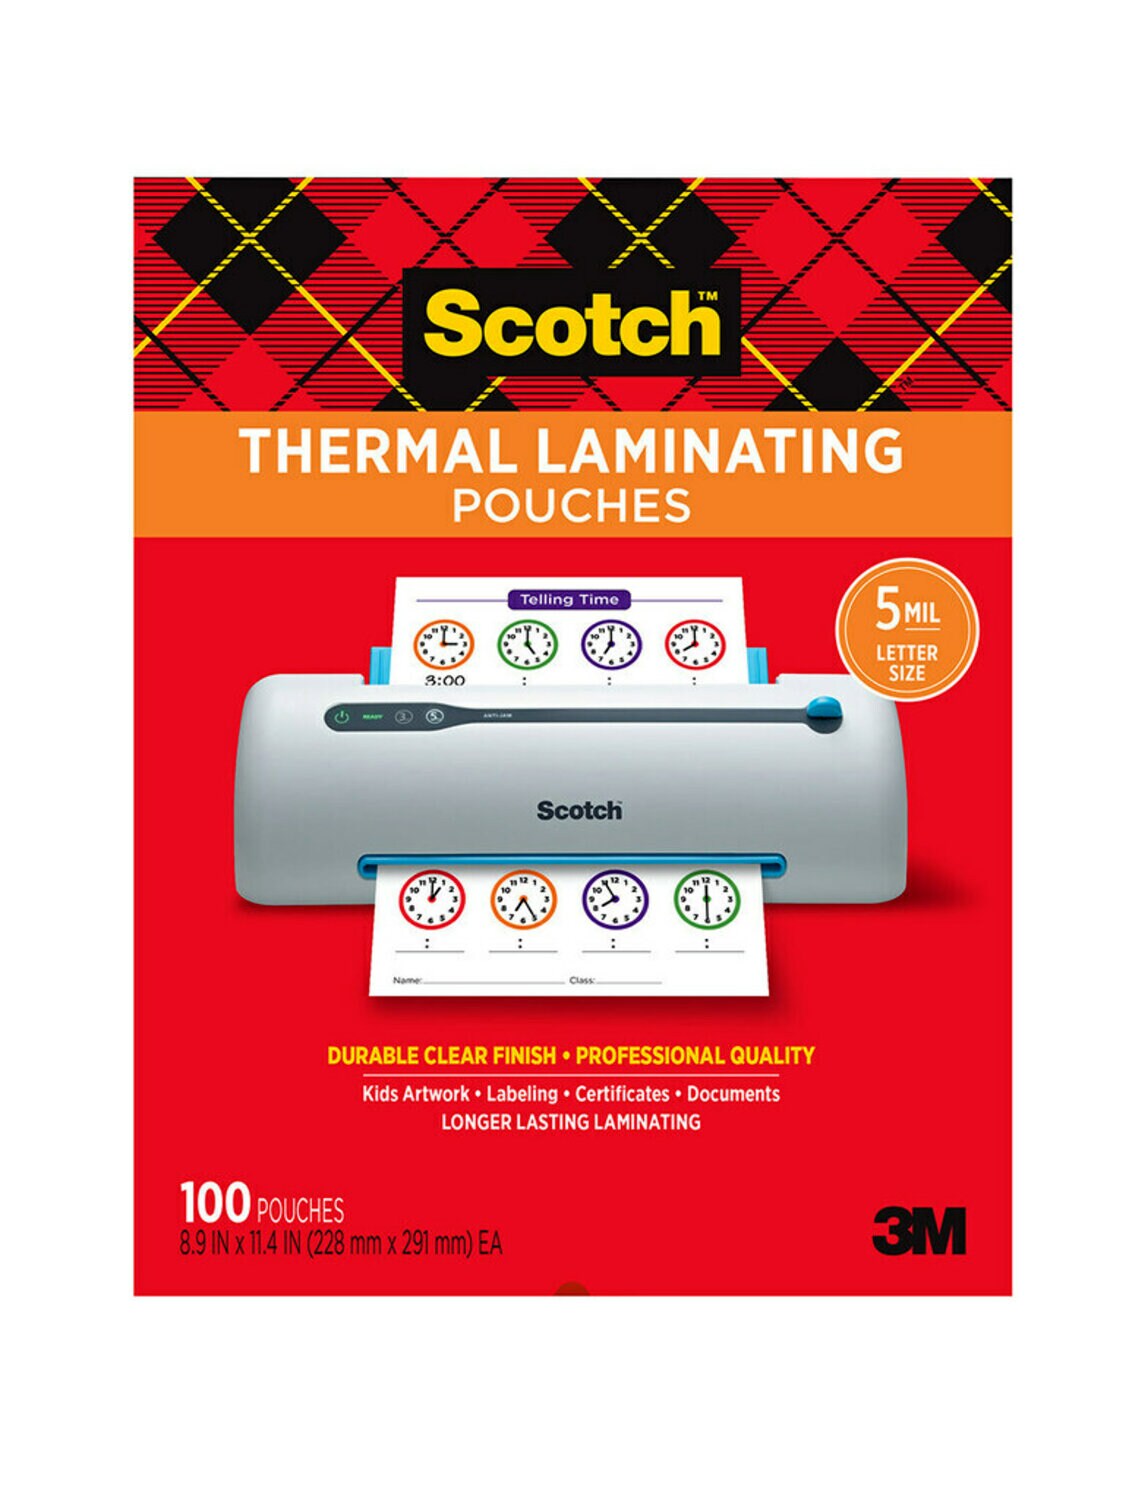 7100233535 - Scotch Thermal Pouches 5 mil TP5854-100, 8.9 in x 11.4 in (228 mm x 291 mm)